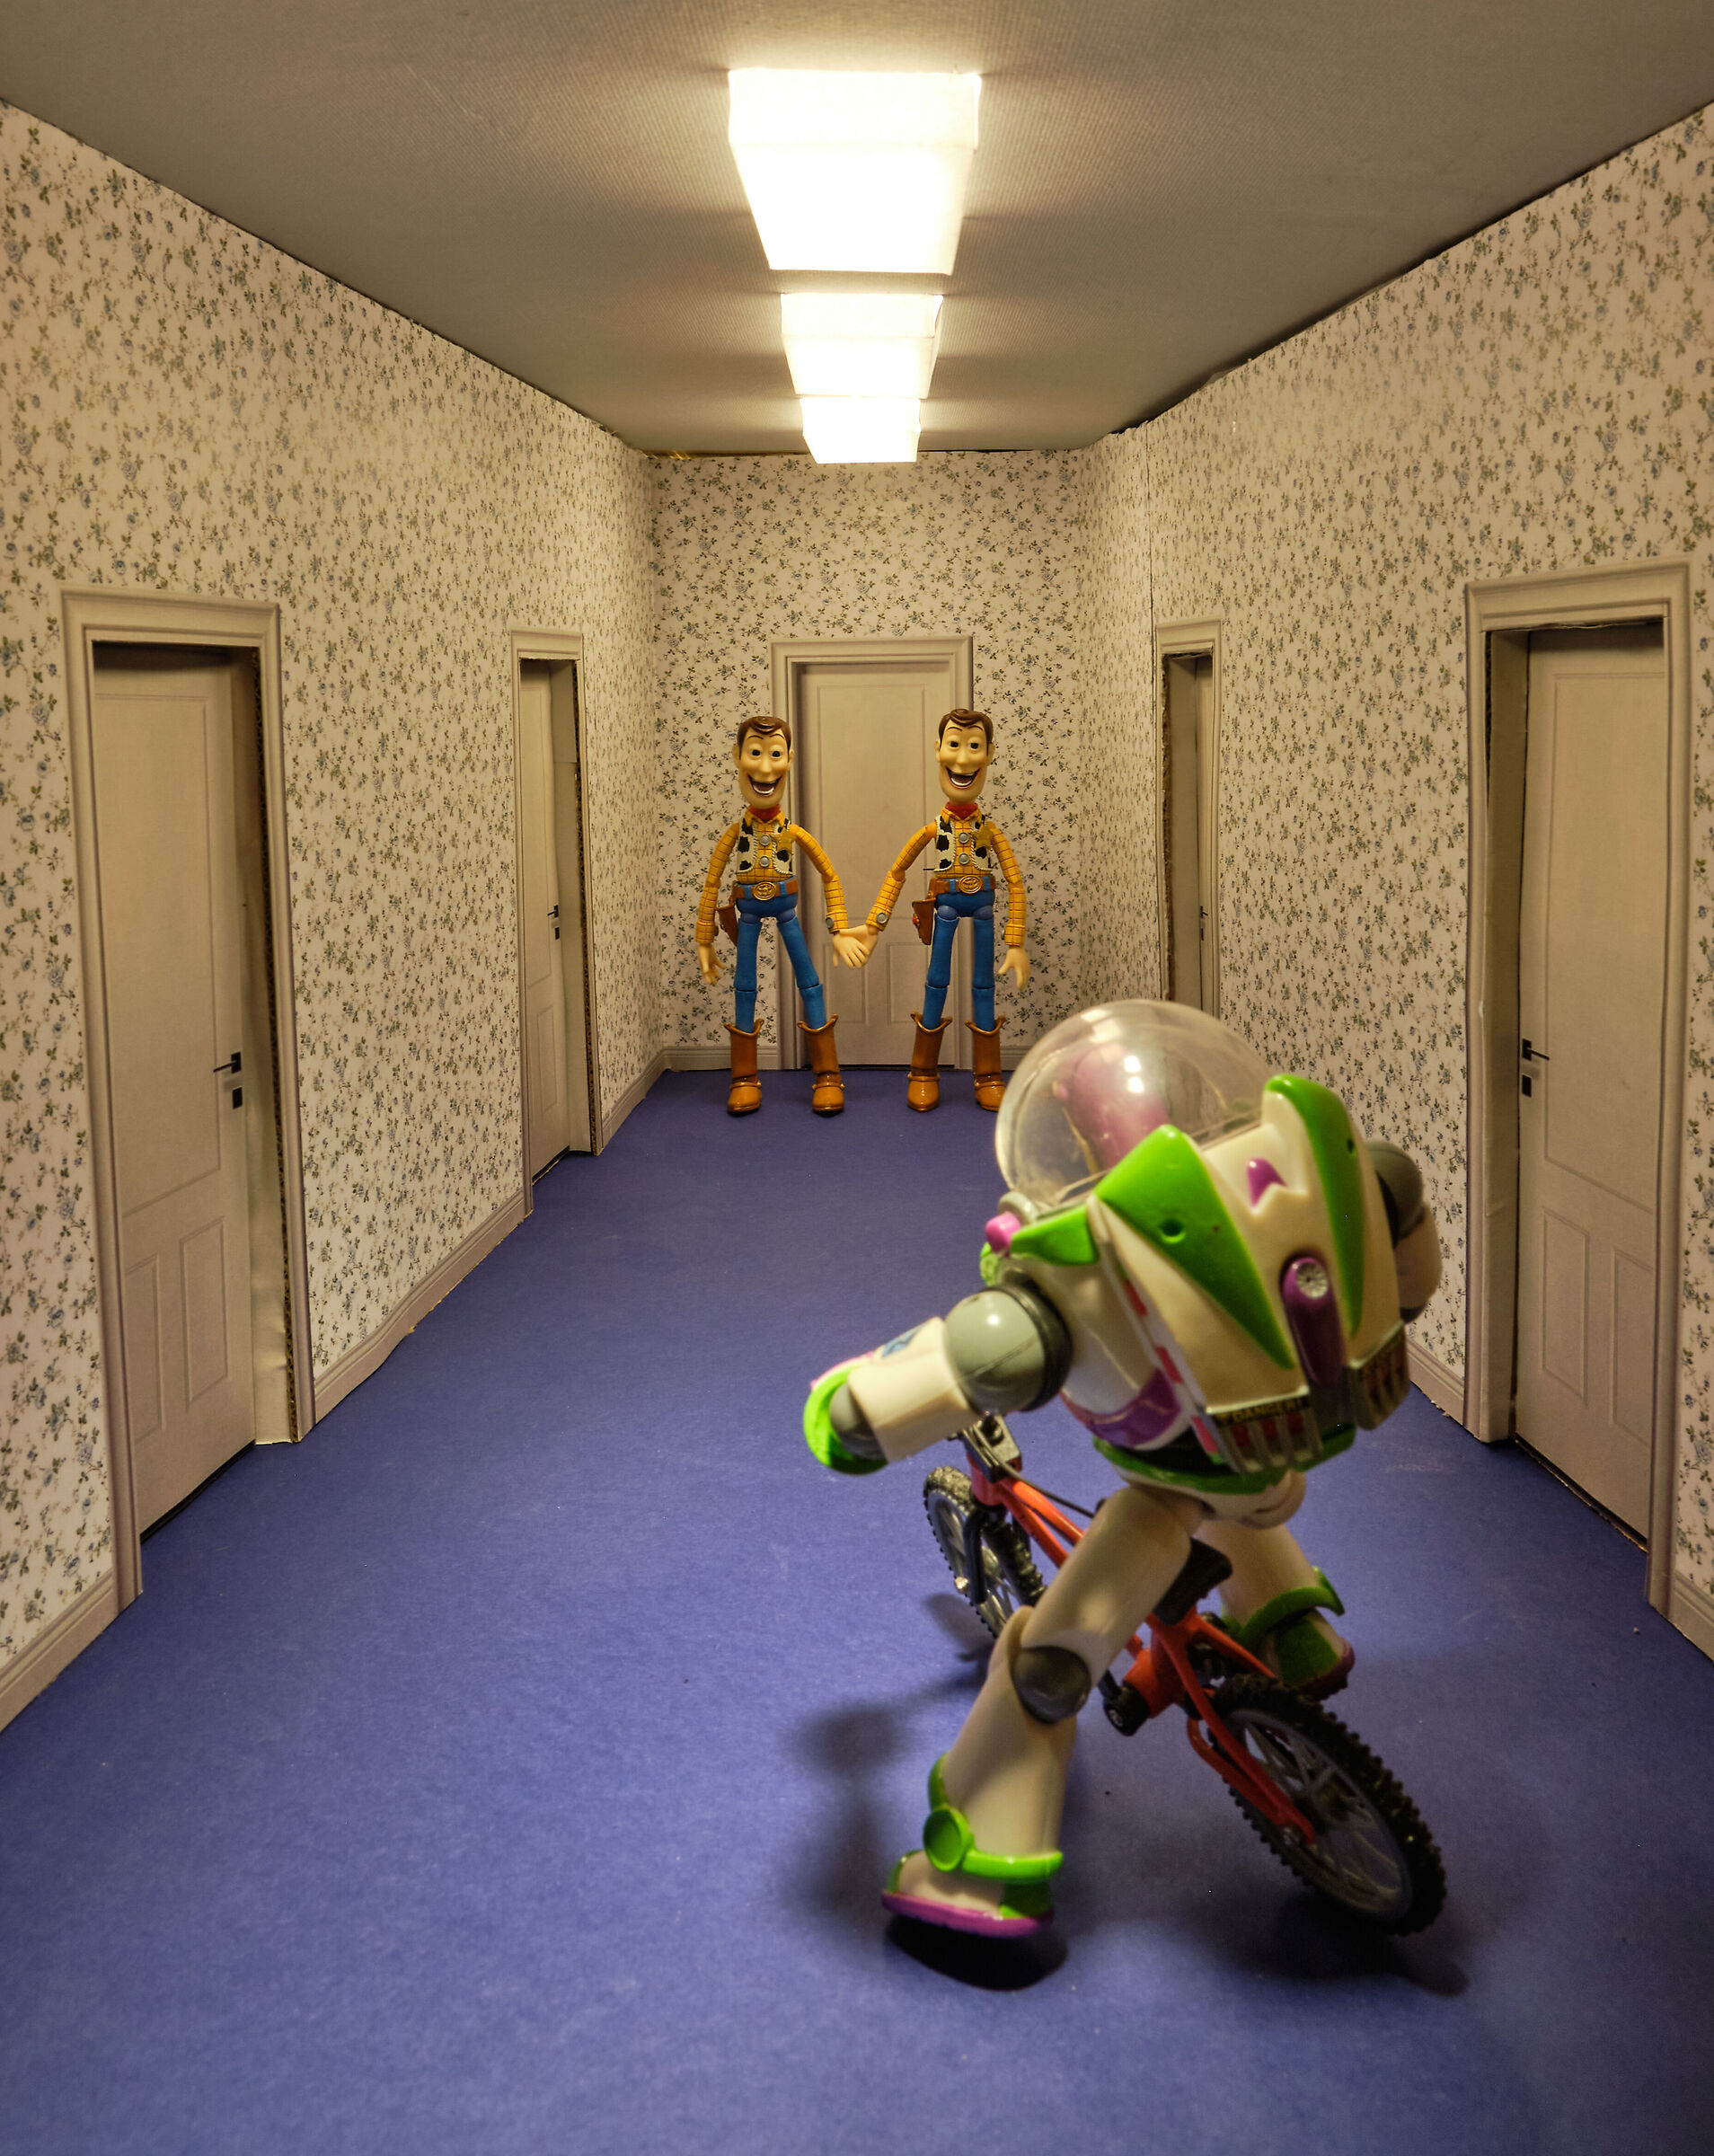 Toy story in the Stanley hotel....